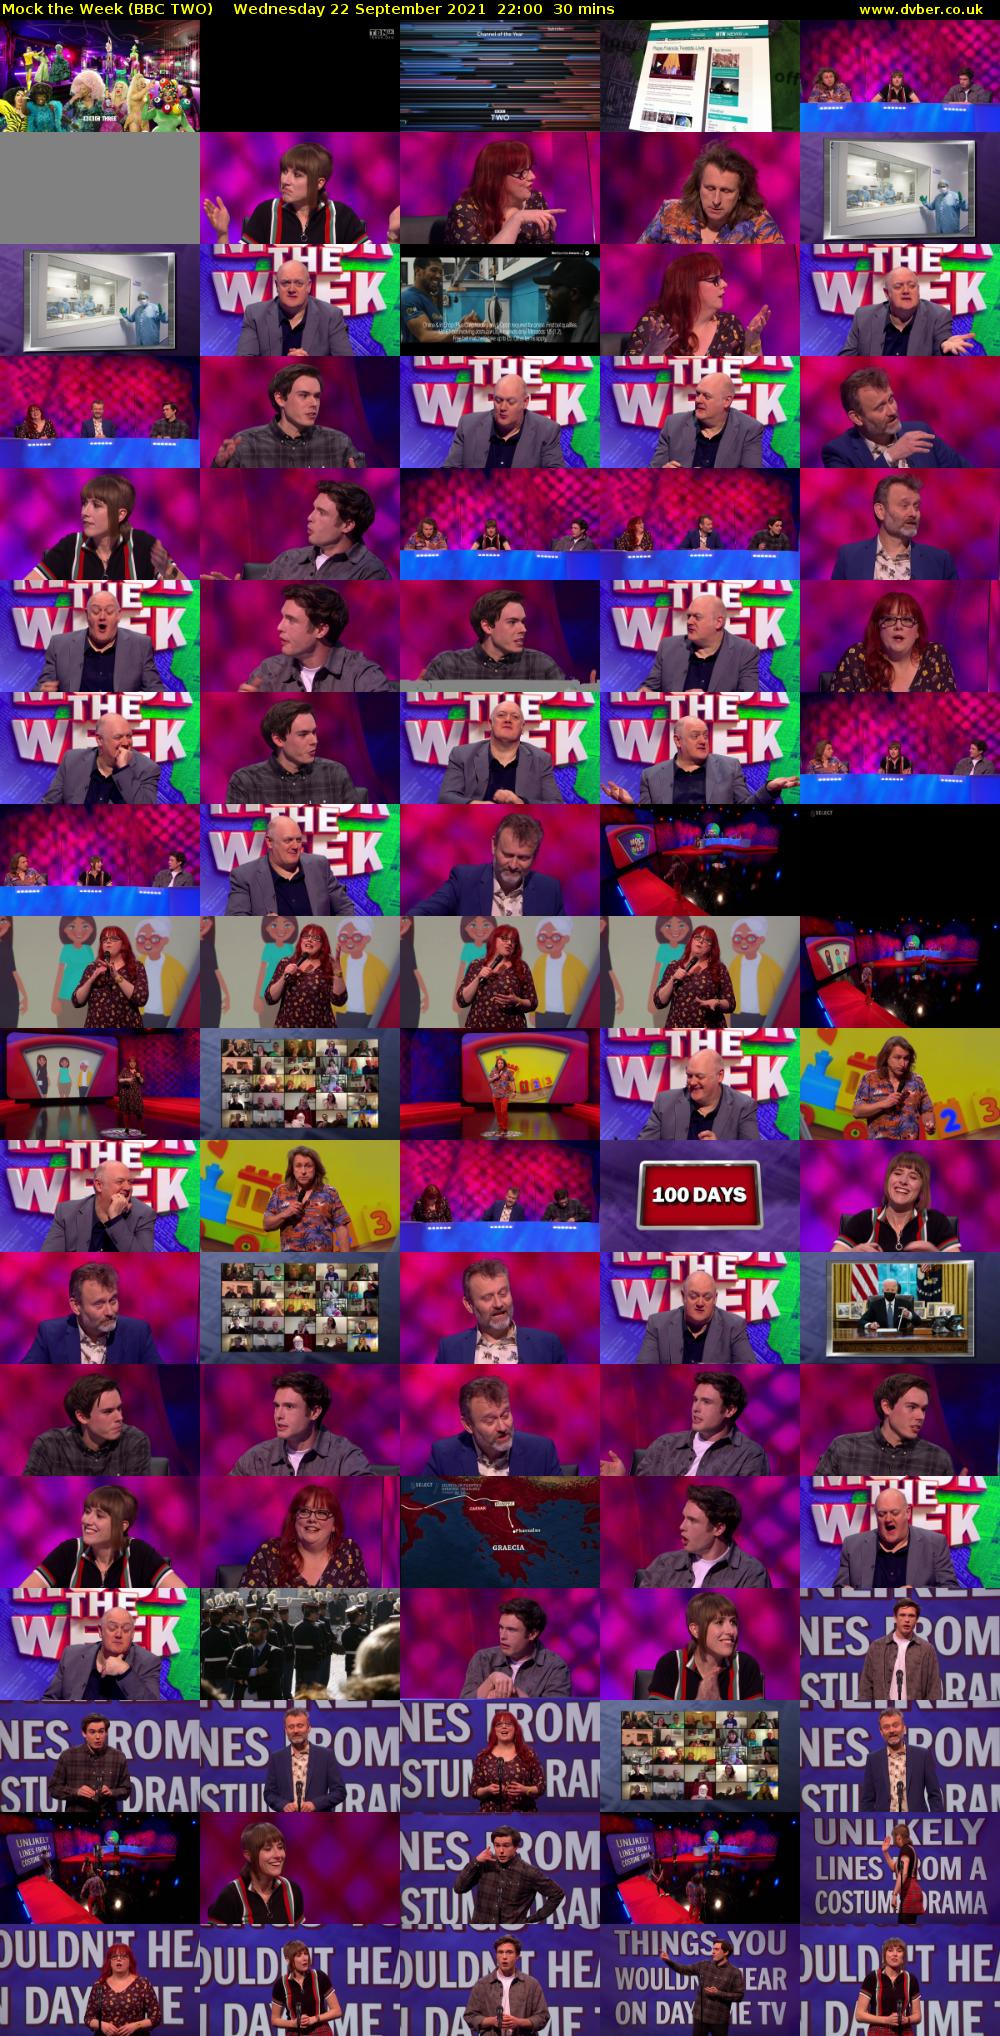 Mock the Week (BBC TWO) Wednesday 22 September 2021 22:00 - 22:30